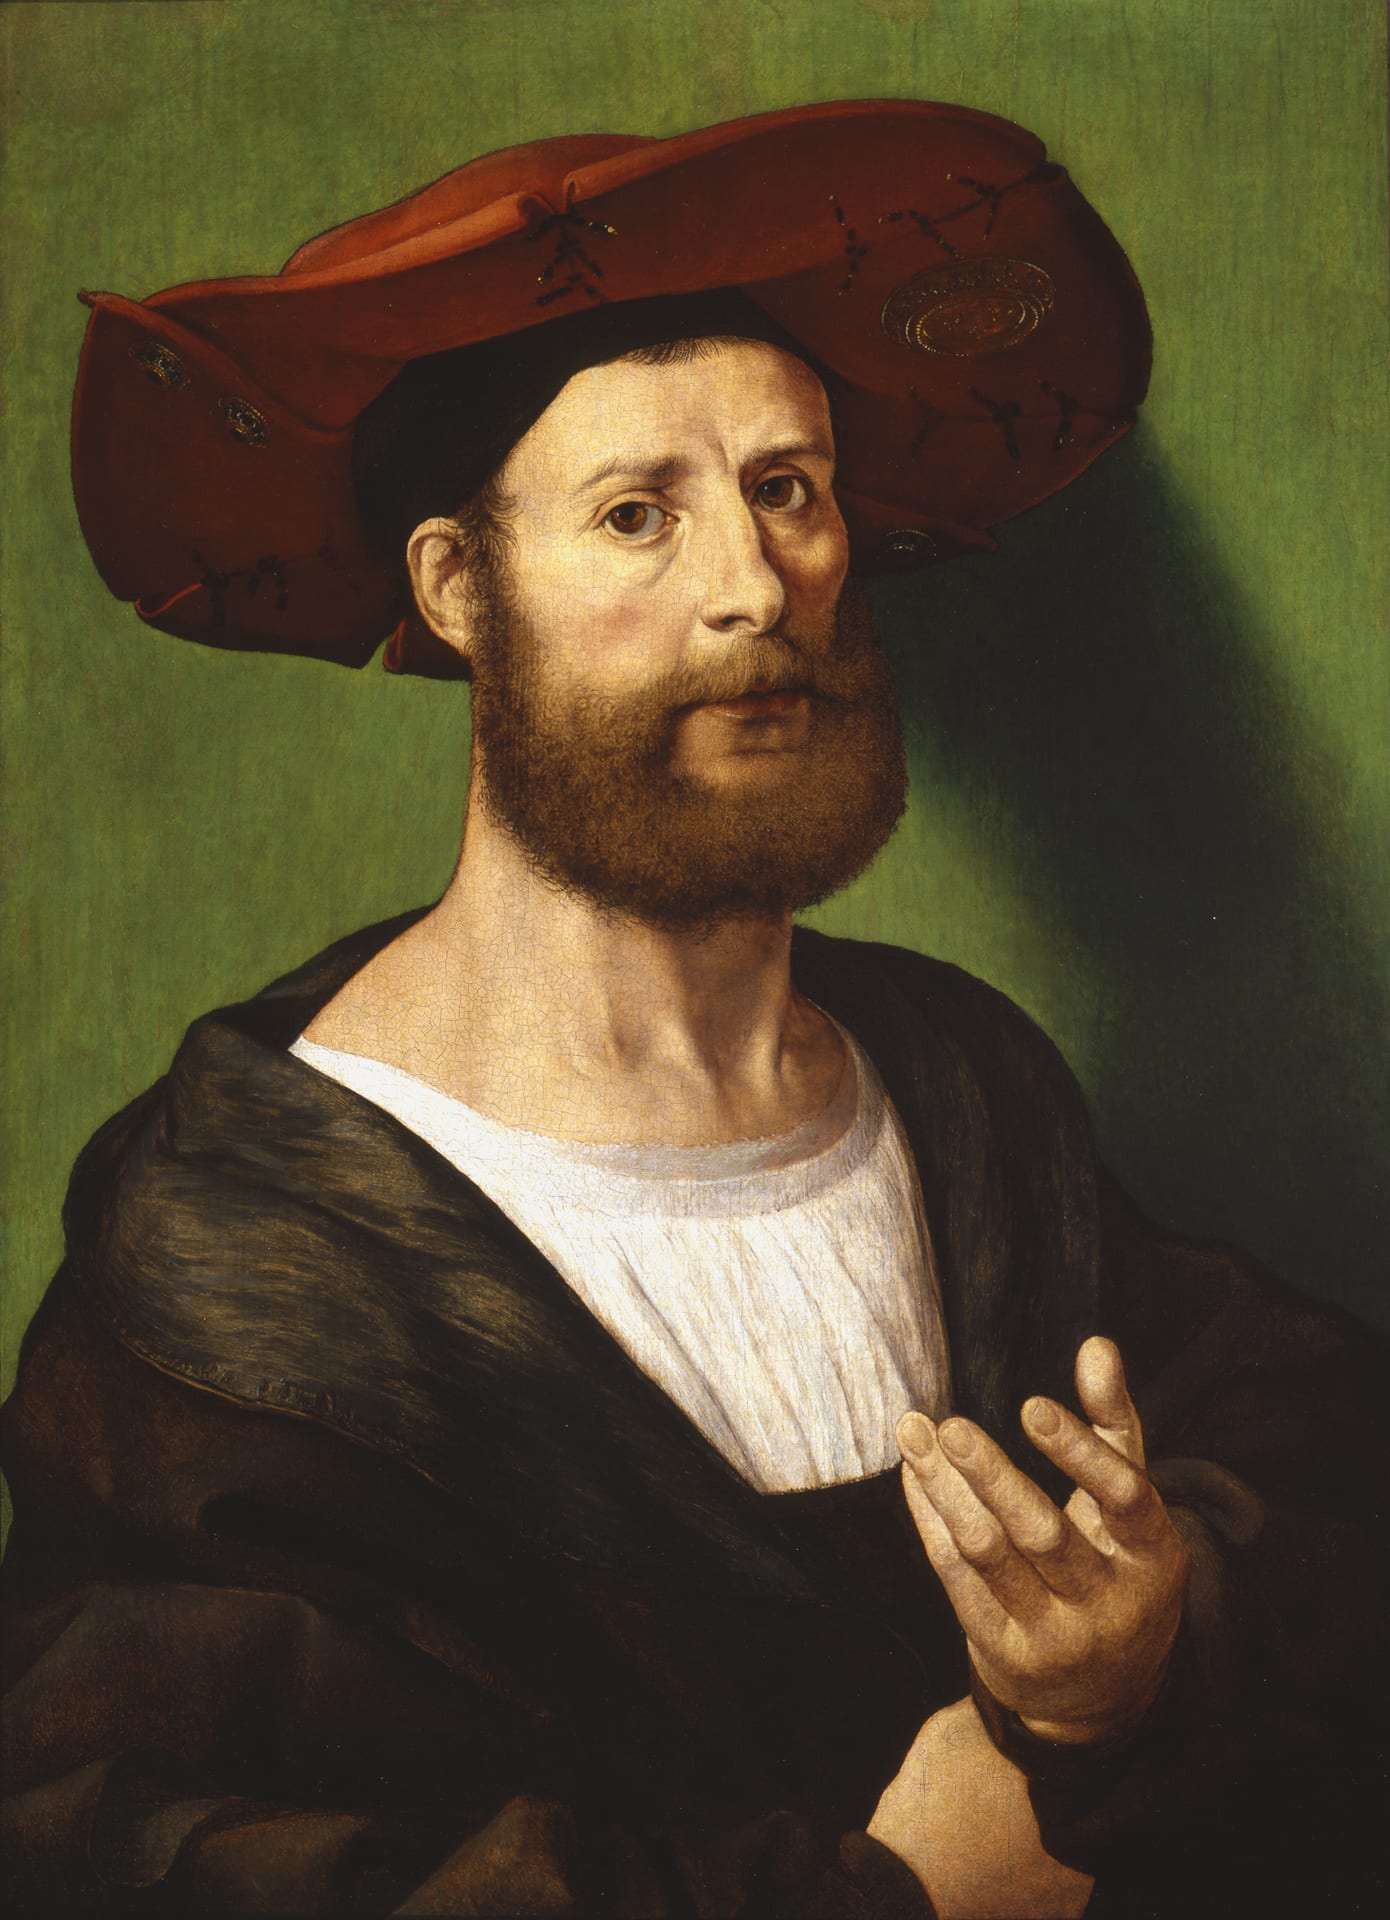 a portrait of a man in a red hat and a brown and white garment gesturing to the viewer with his left hand